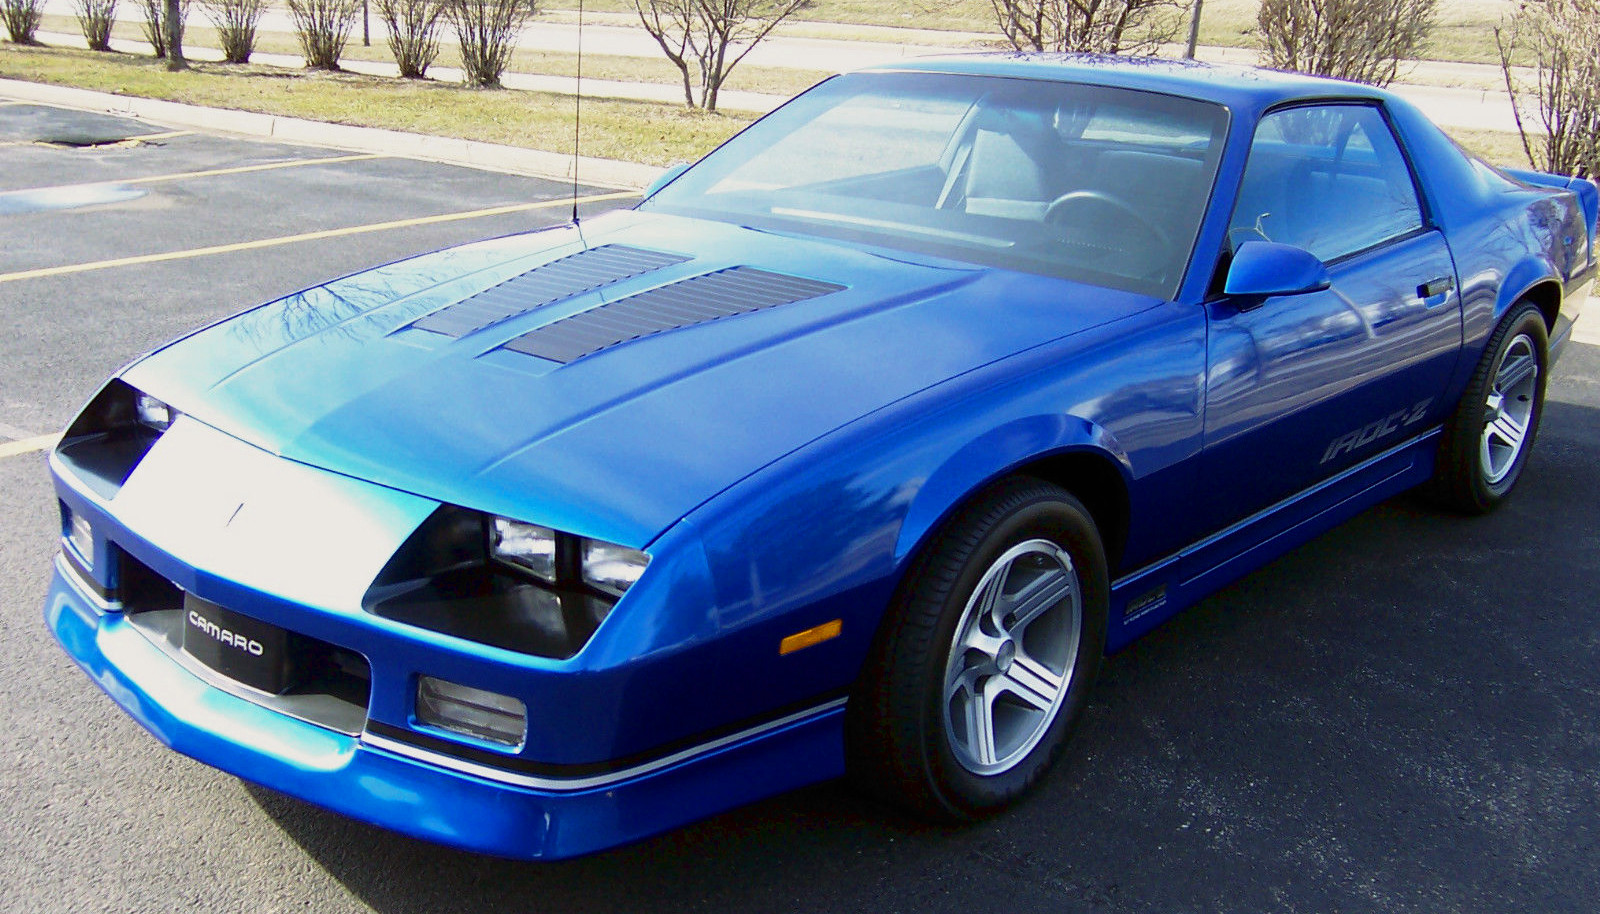 Buy An Impeccable 1990 Chevy Camaro IROC-Z 1LE: eBay Find | GM Authority